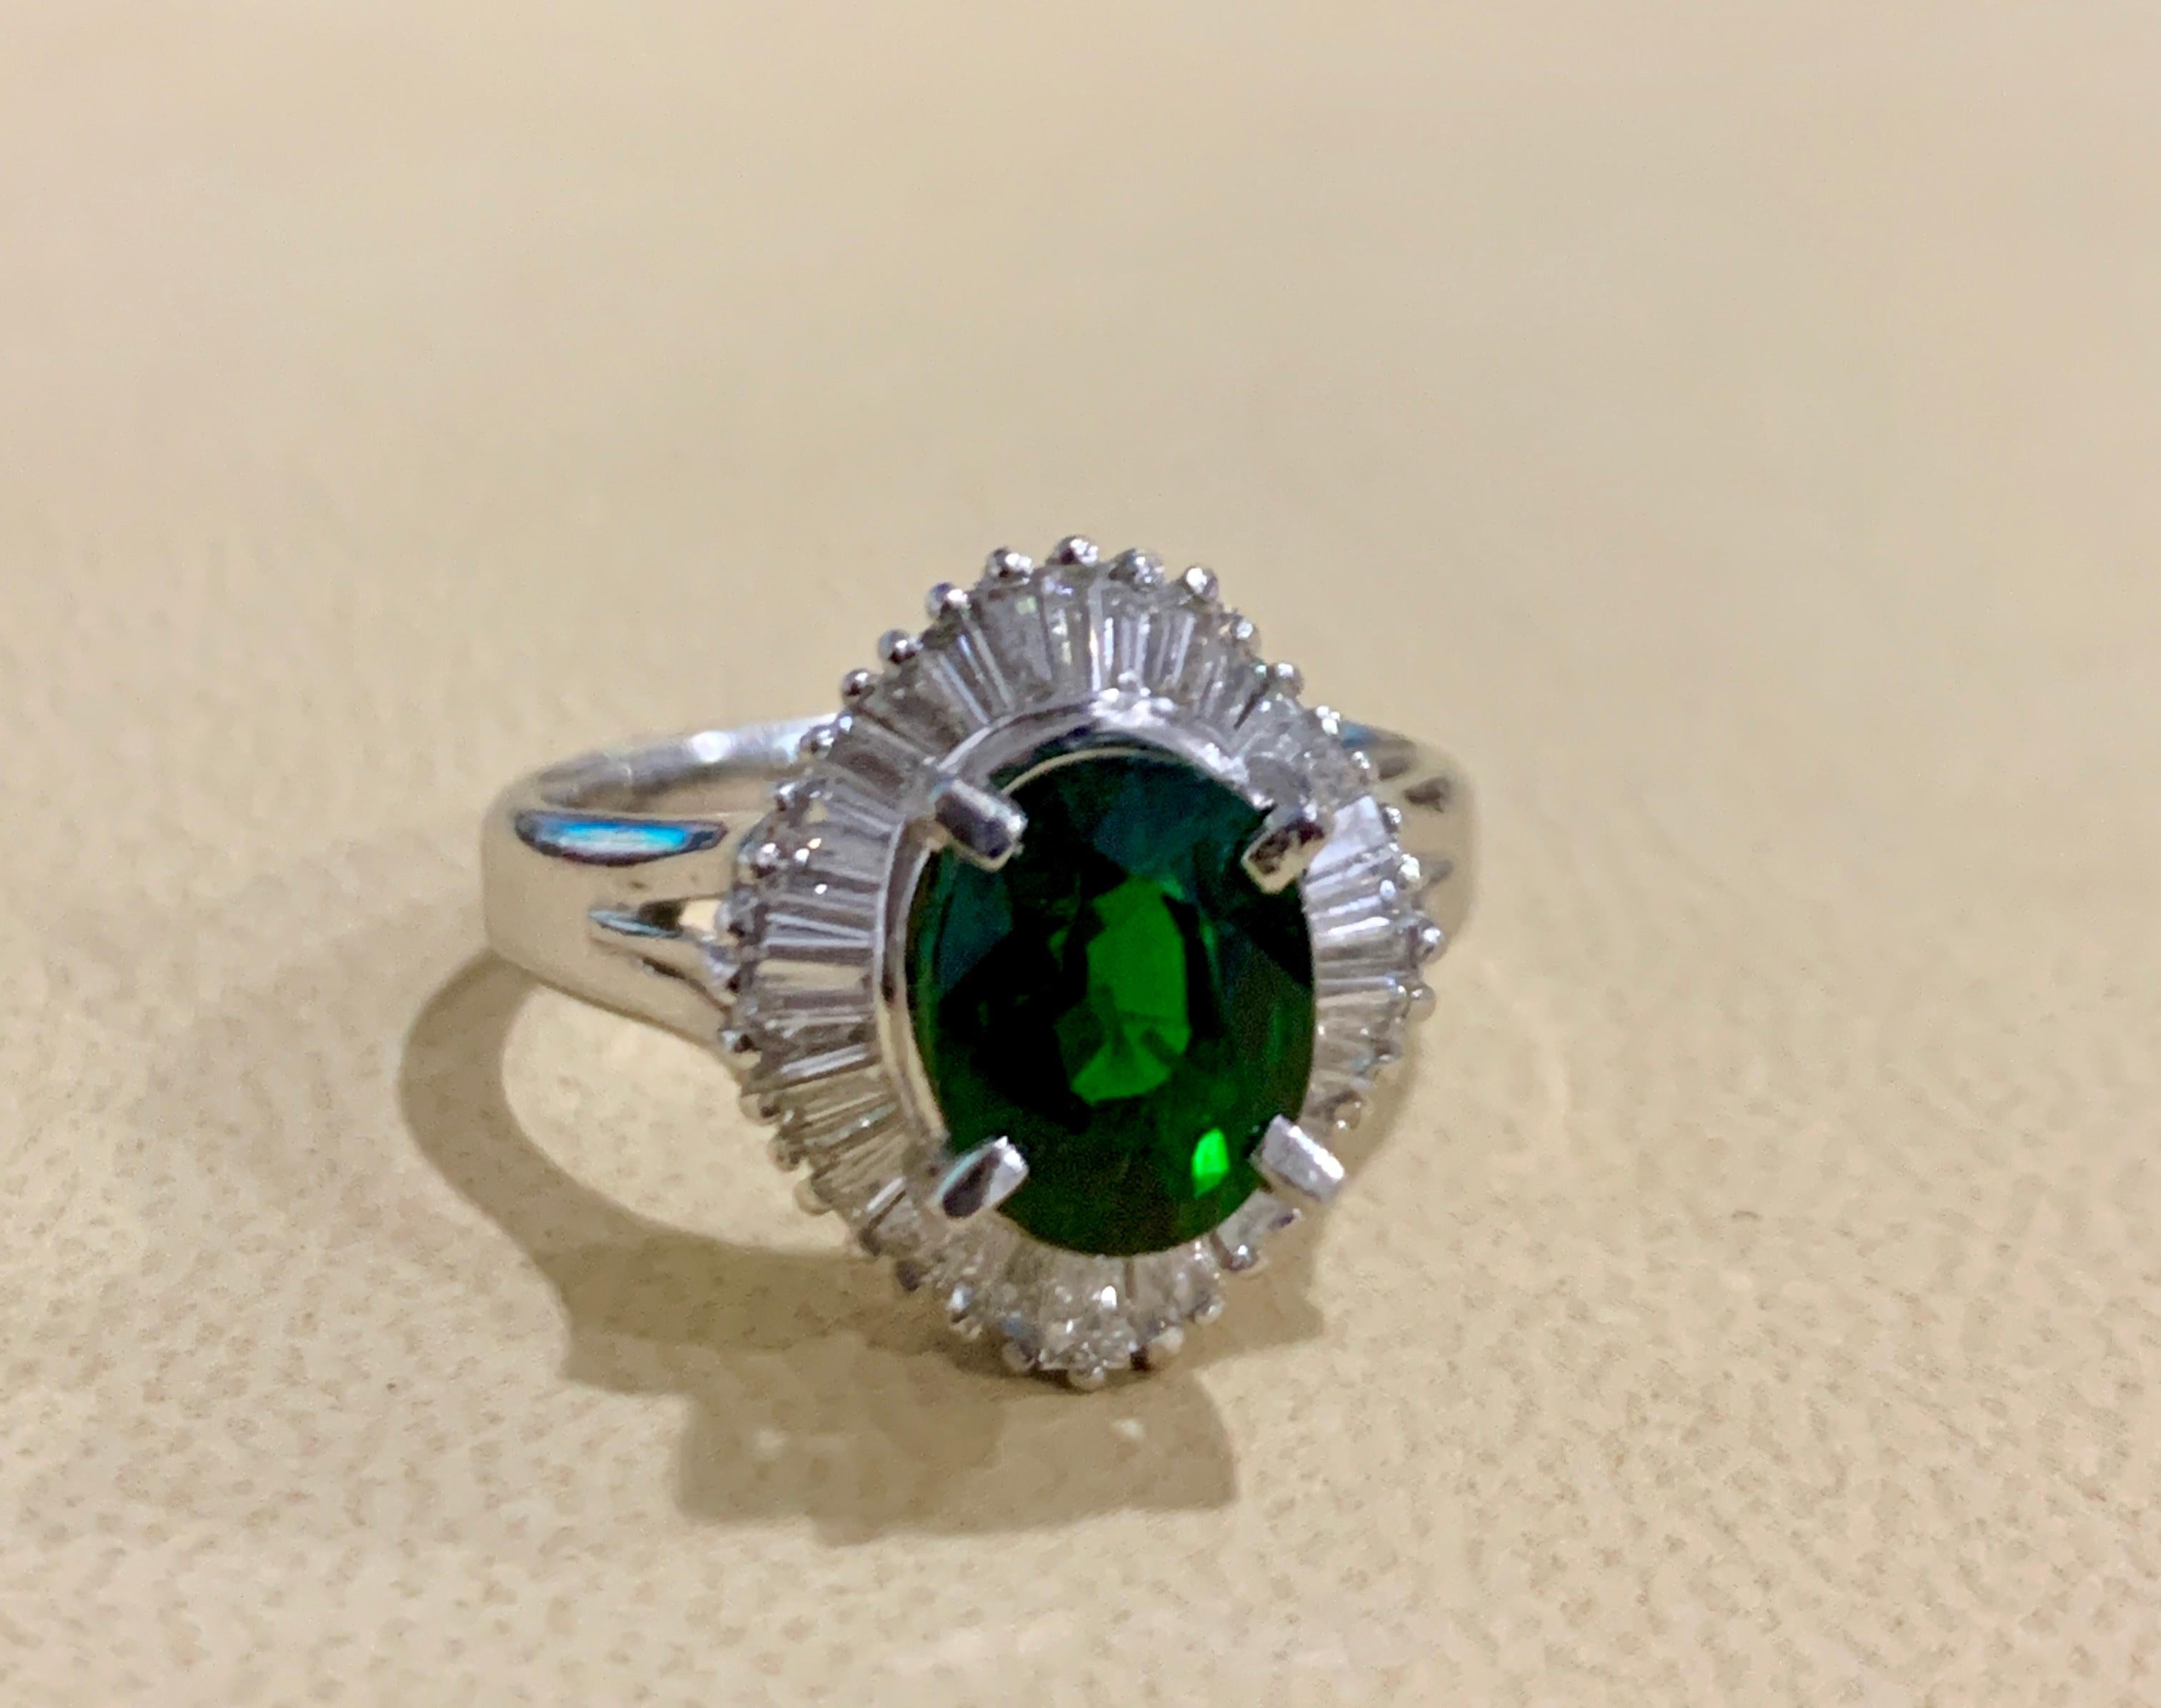 Oval Cut 1.8 Carat Oval Tsavorite and 1.0 Carat Diamond Ring in Platinum Estate Size 6 For Sale